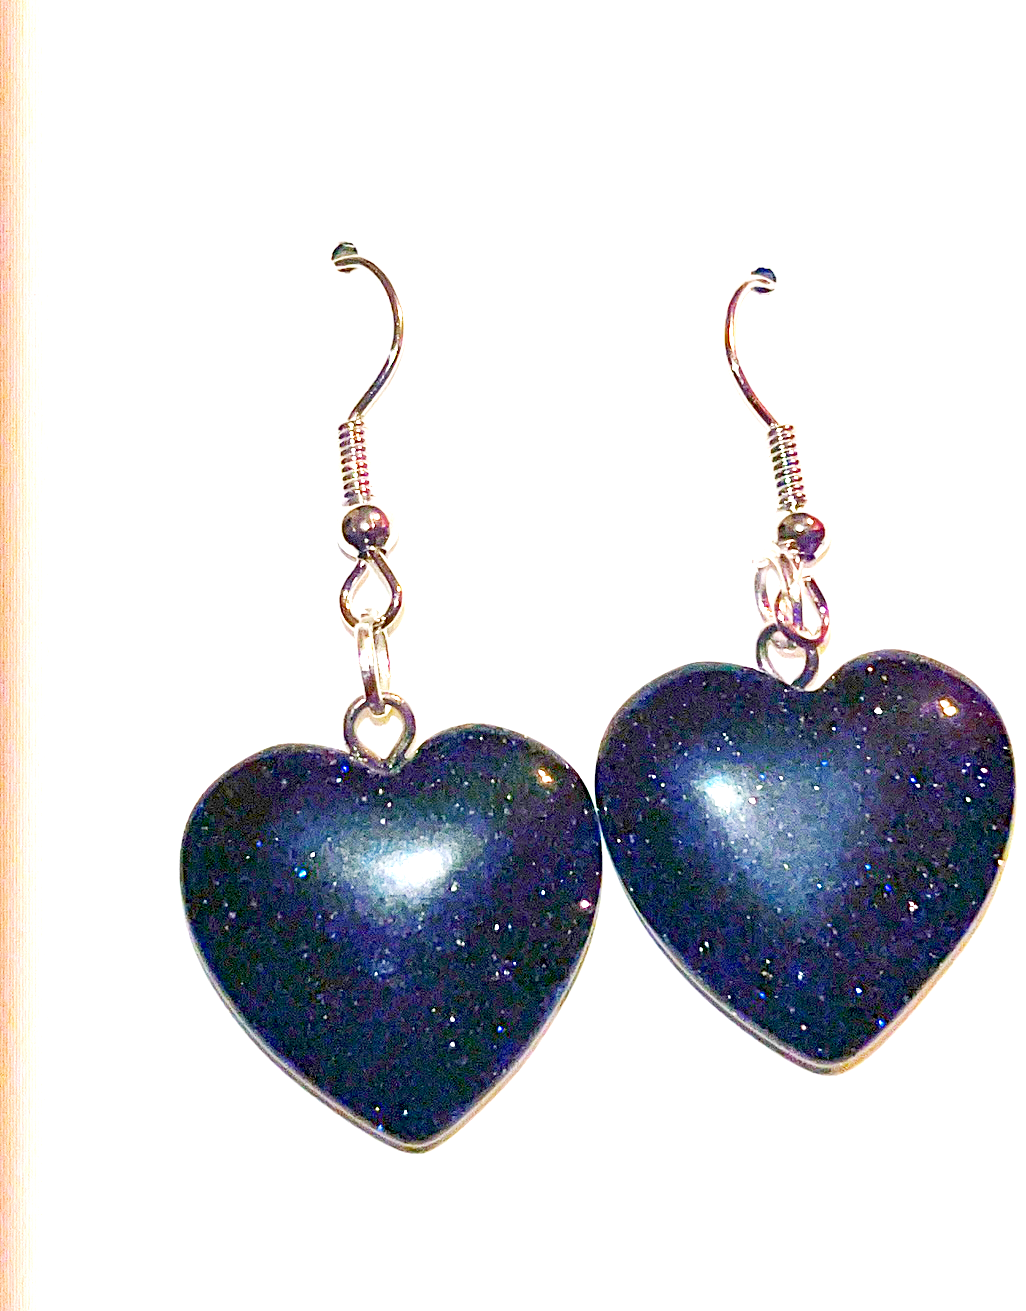 Mini crystal heart dangle hook earrings in Carnelian, Blue Sandstone, Picture Stone, and Mahogany Obsidian. 0.75 x 0.75 inches.